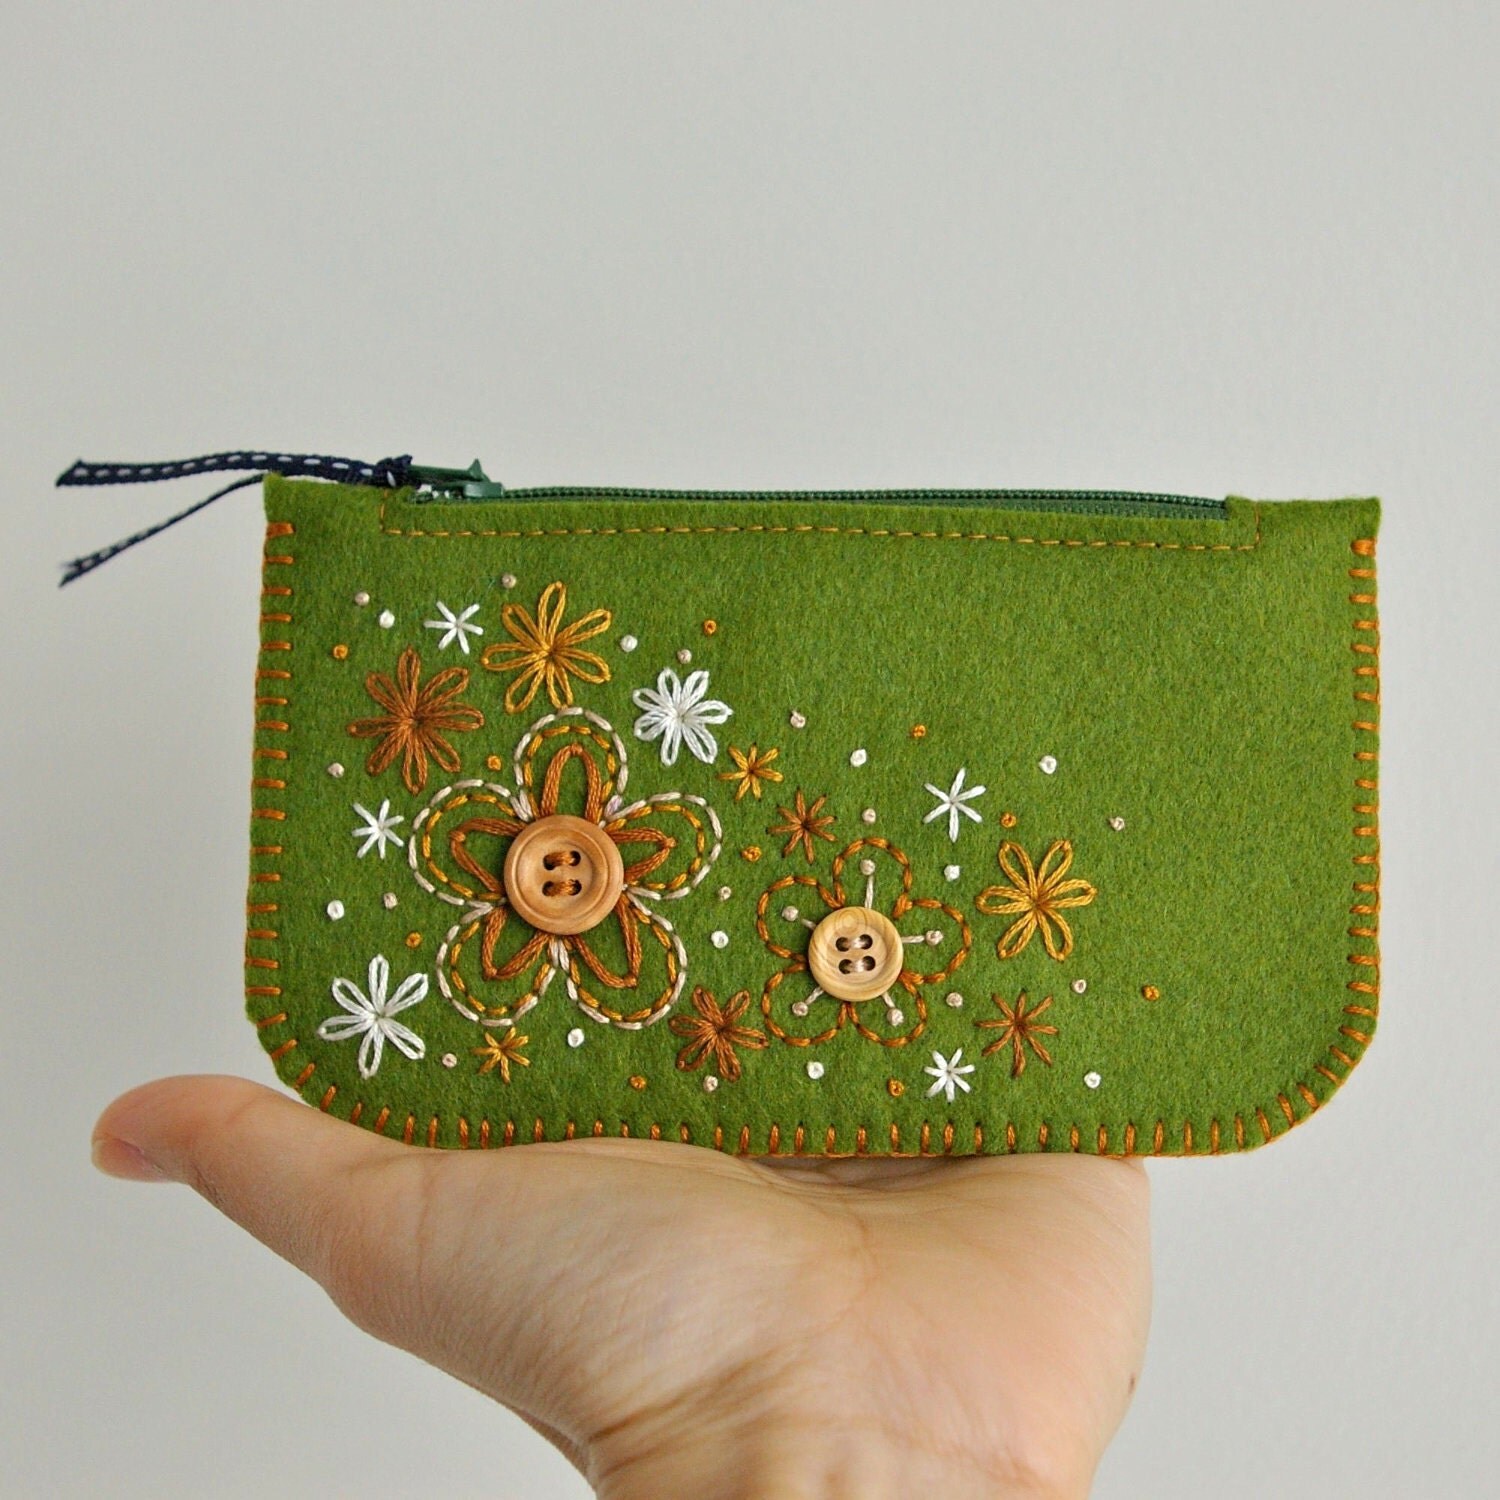 Sweet Blossoms: Made To Order Hand Embroidered Wool Felt Coin Purse or iPhone Cozy by LoftFullOfGoodies